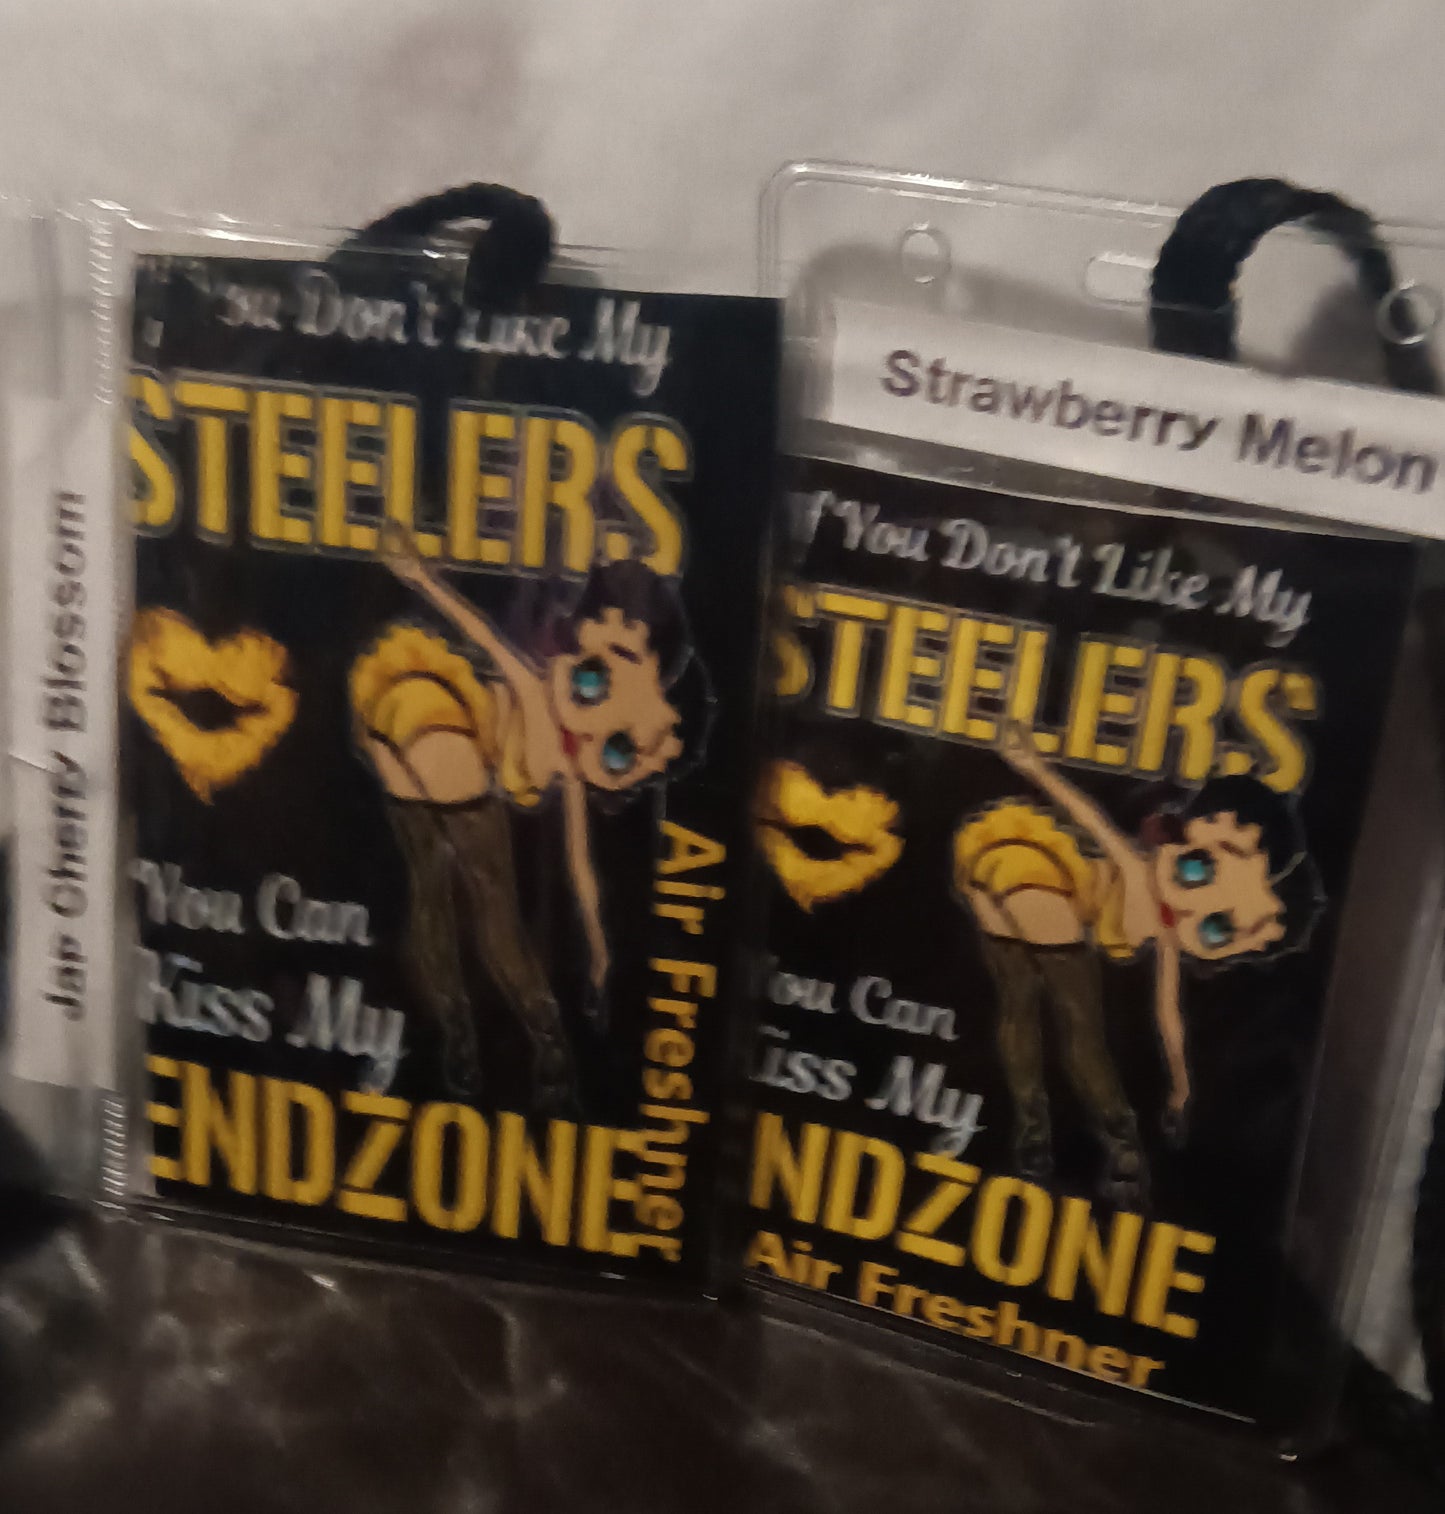 KIss My Endzone with Betty Boop for Steelers Car Air Freshener